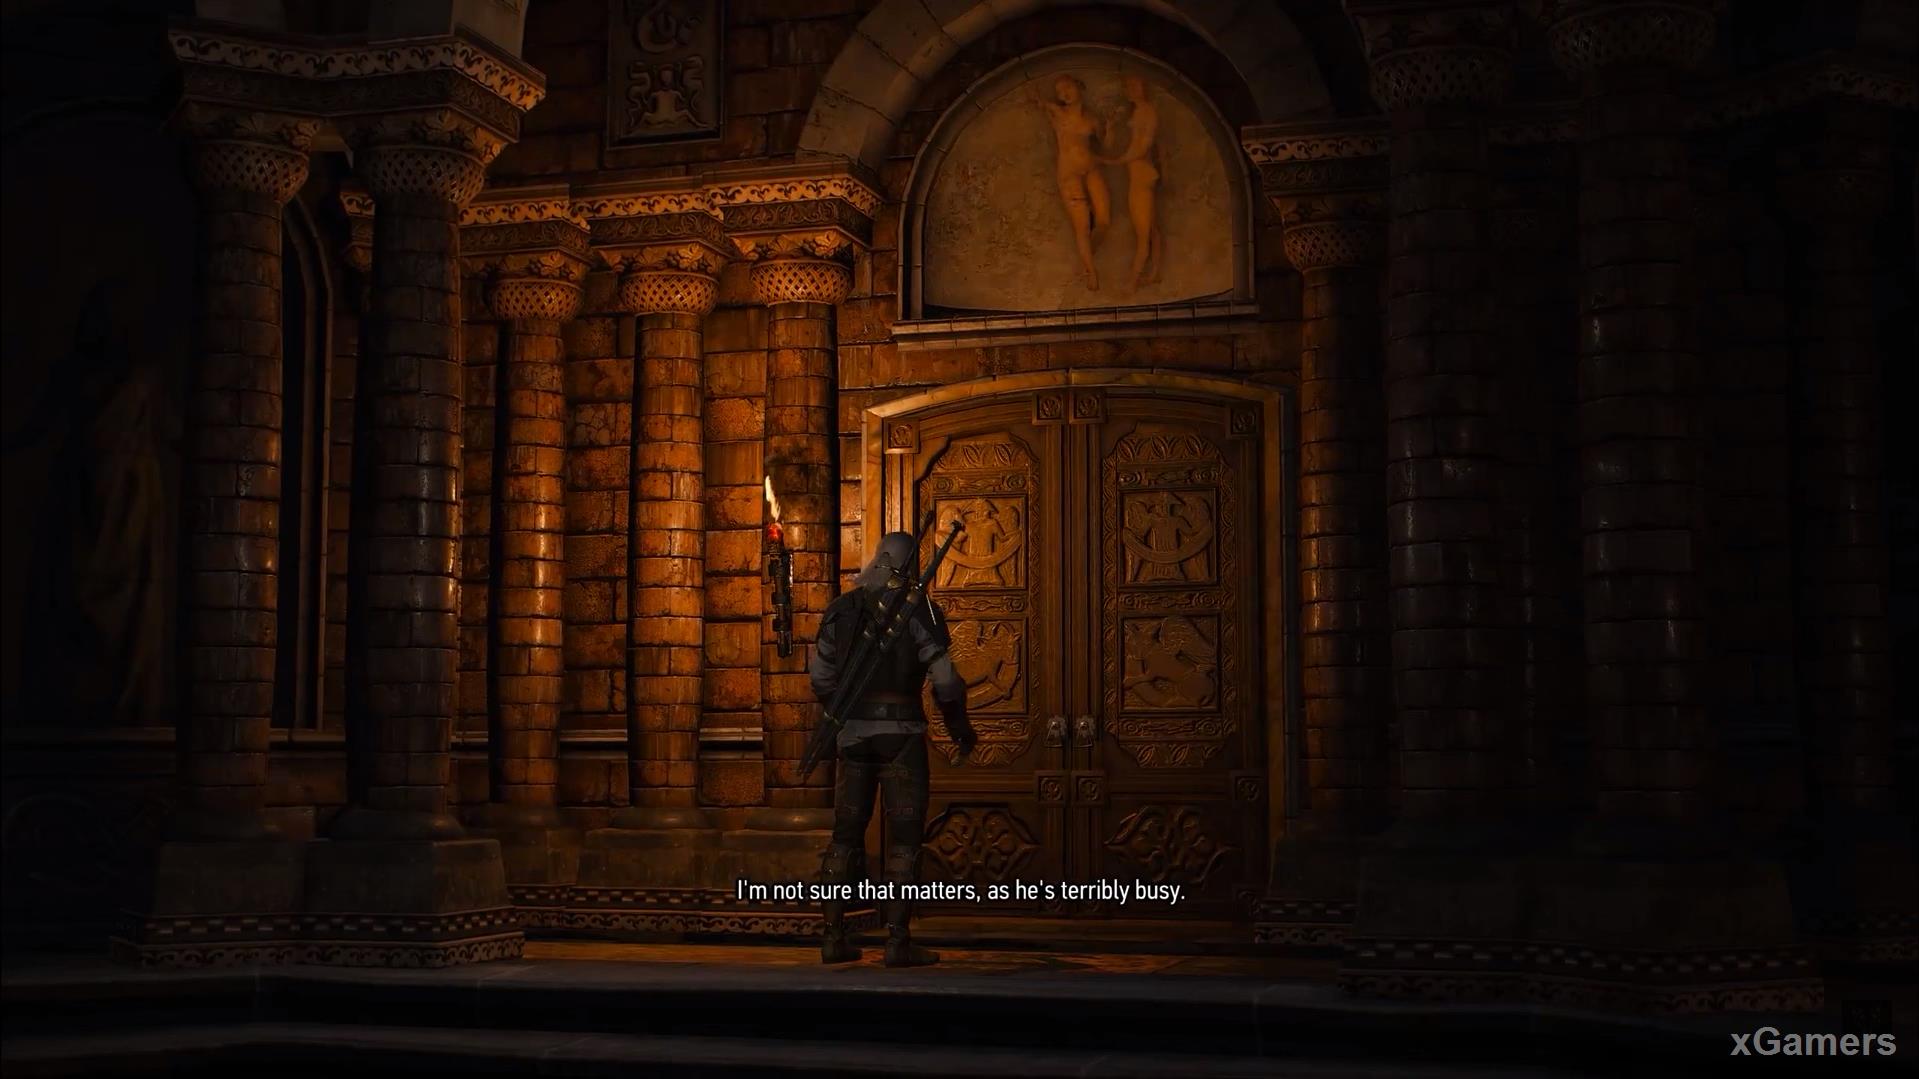 Geralt goes to the baths and a voice behind closed doors